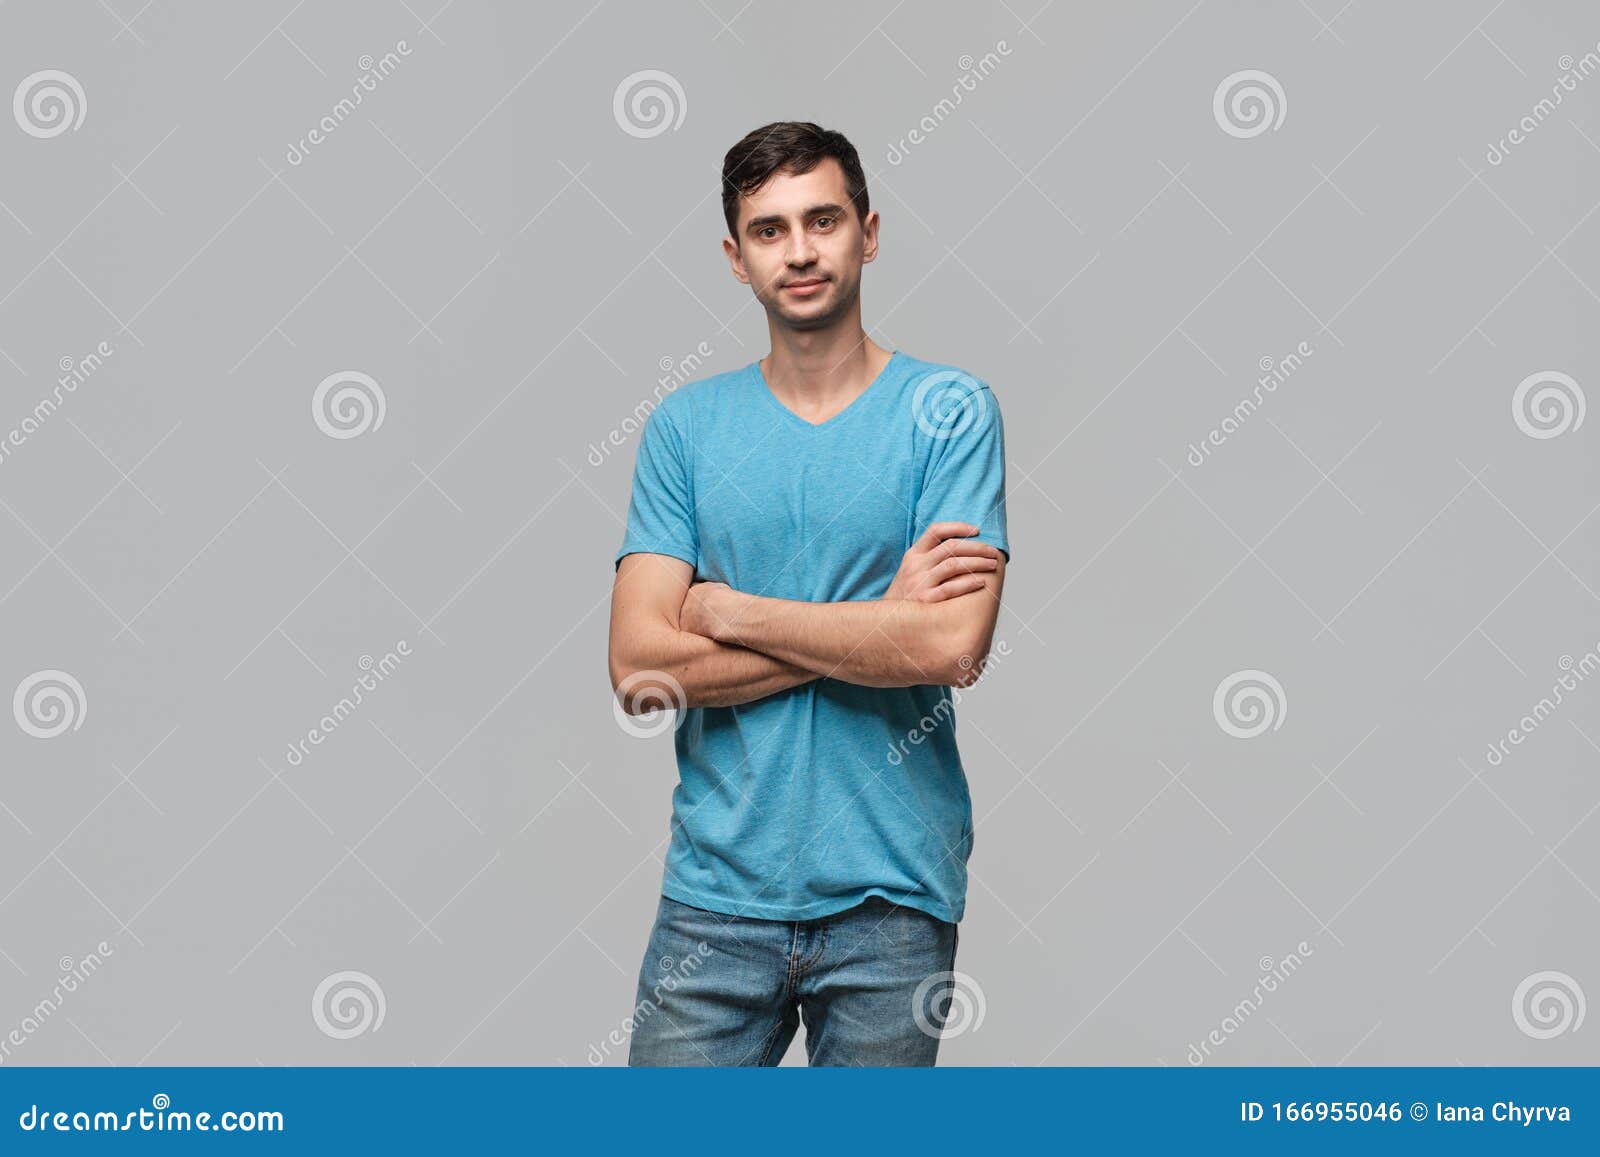 Confident Man in a Blue Tee Lookning at the Camera Holding Hands Crossed. Concept of Confidence